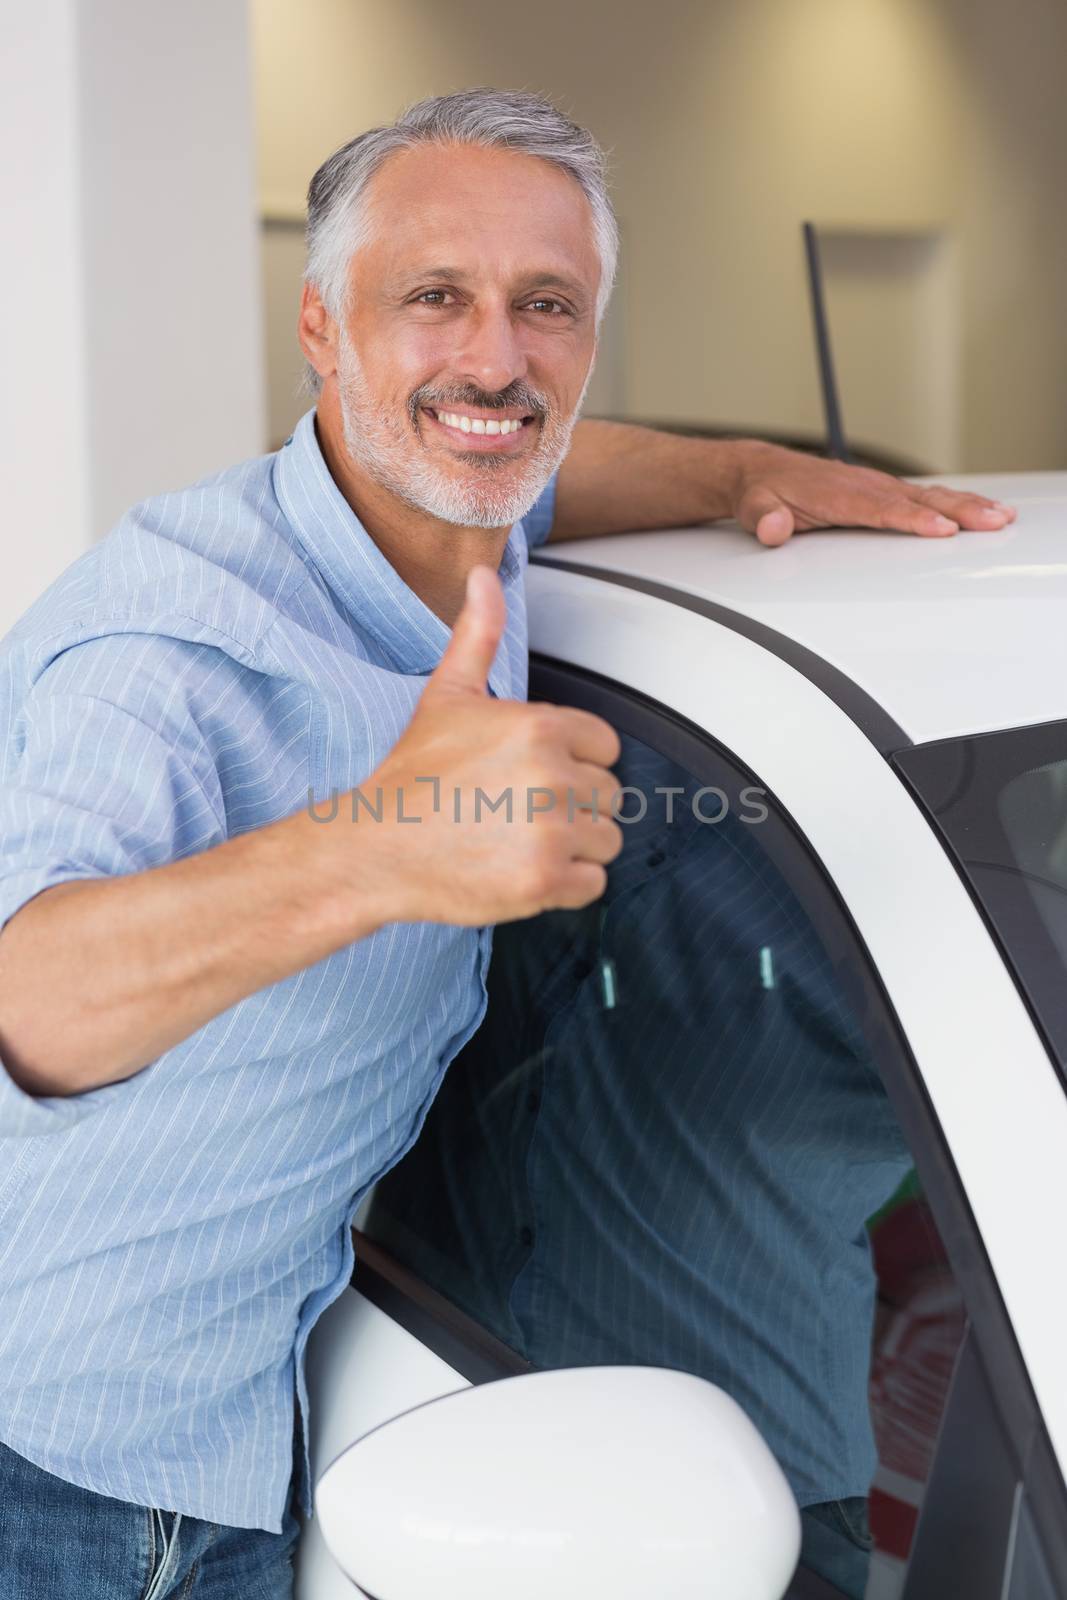 Smiling man hugging a white car while giving thumbs up by Wavebreakmedia